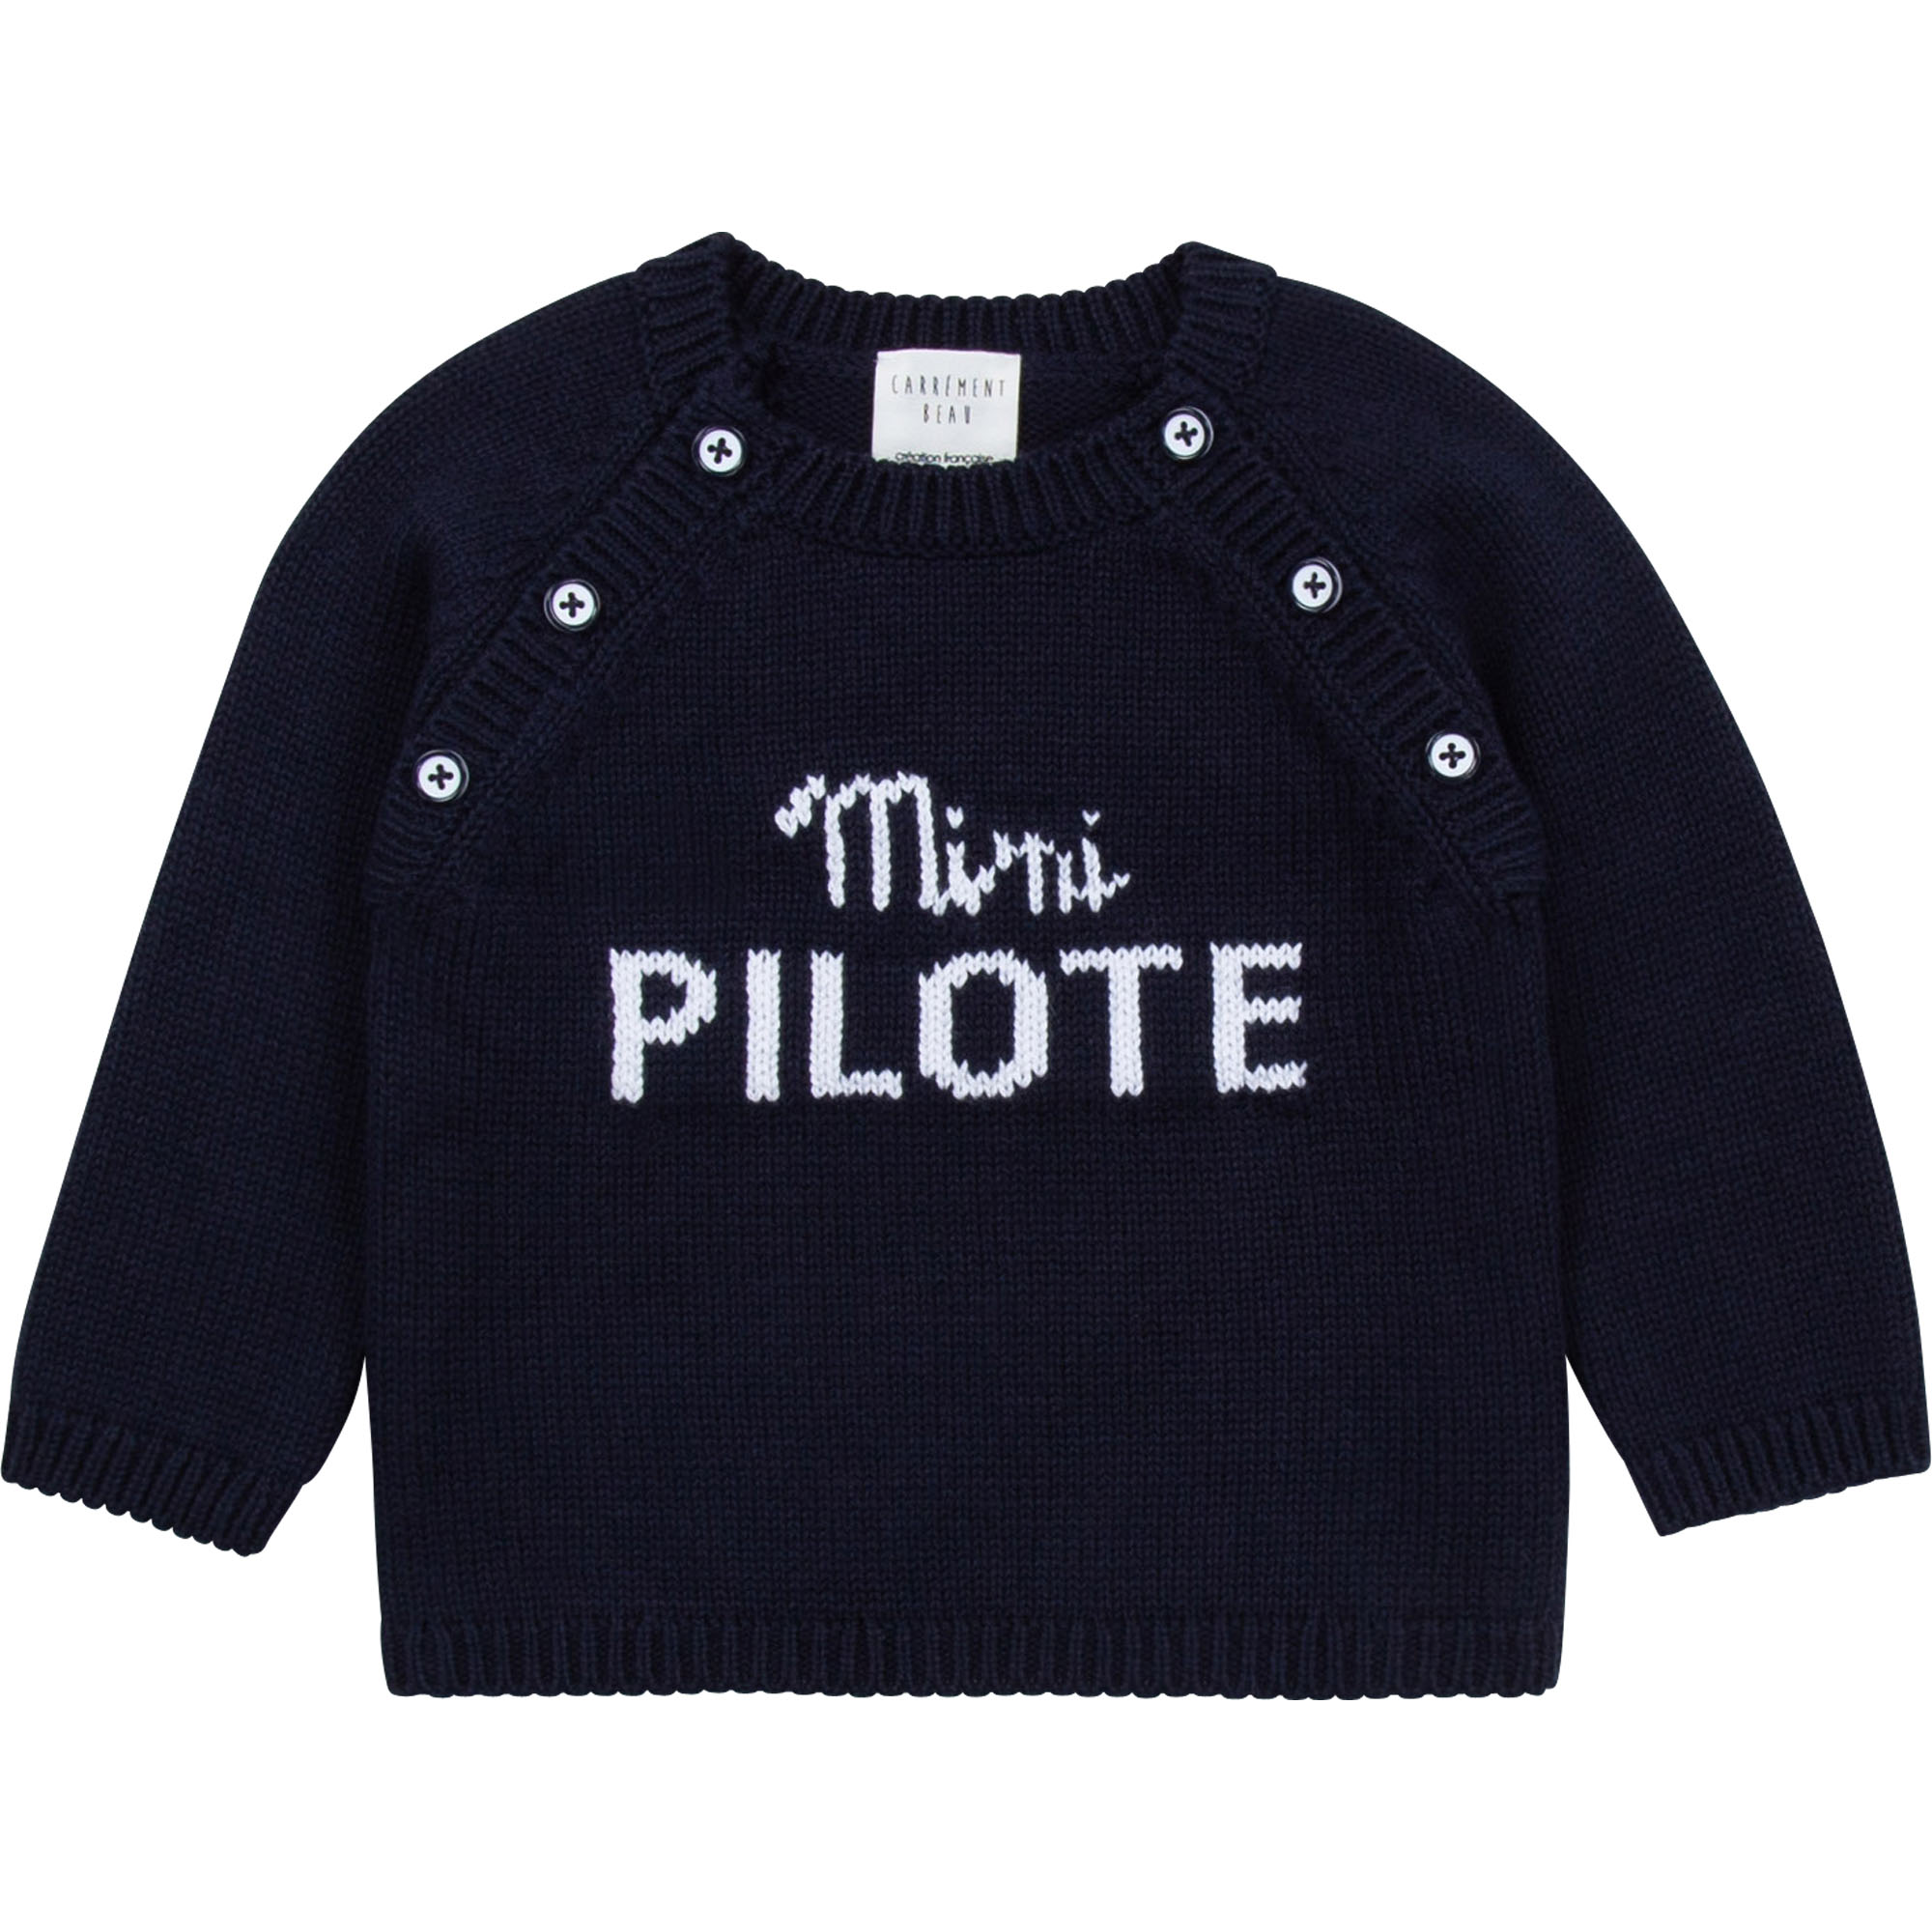 Cotton and wool buttoned sweater CARREMENT BEAU for BOY